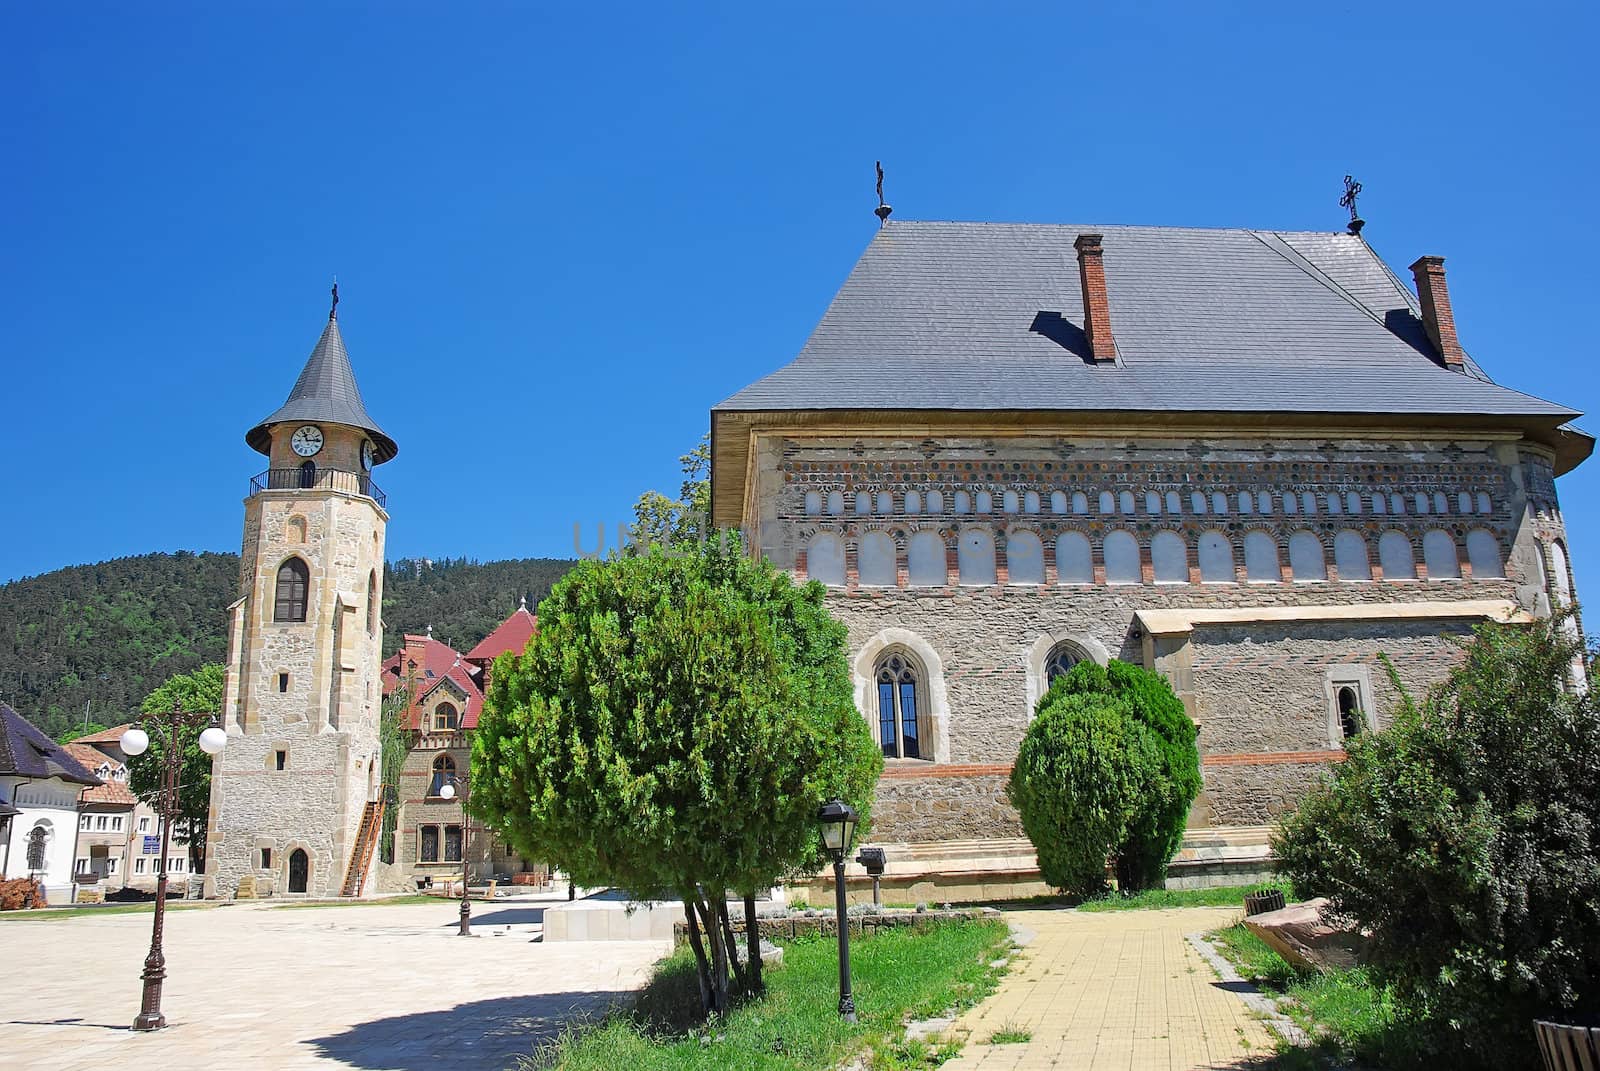 Historic complex in Romania: Tower and church of Stephen the Great